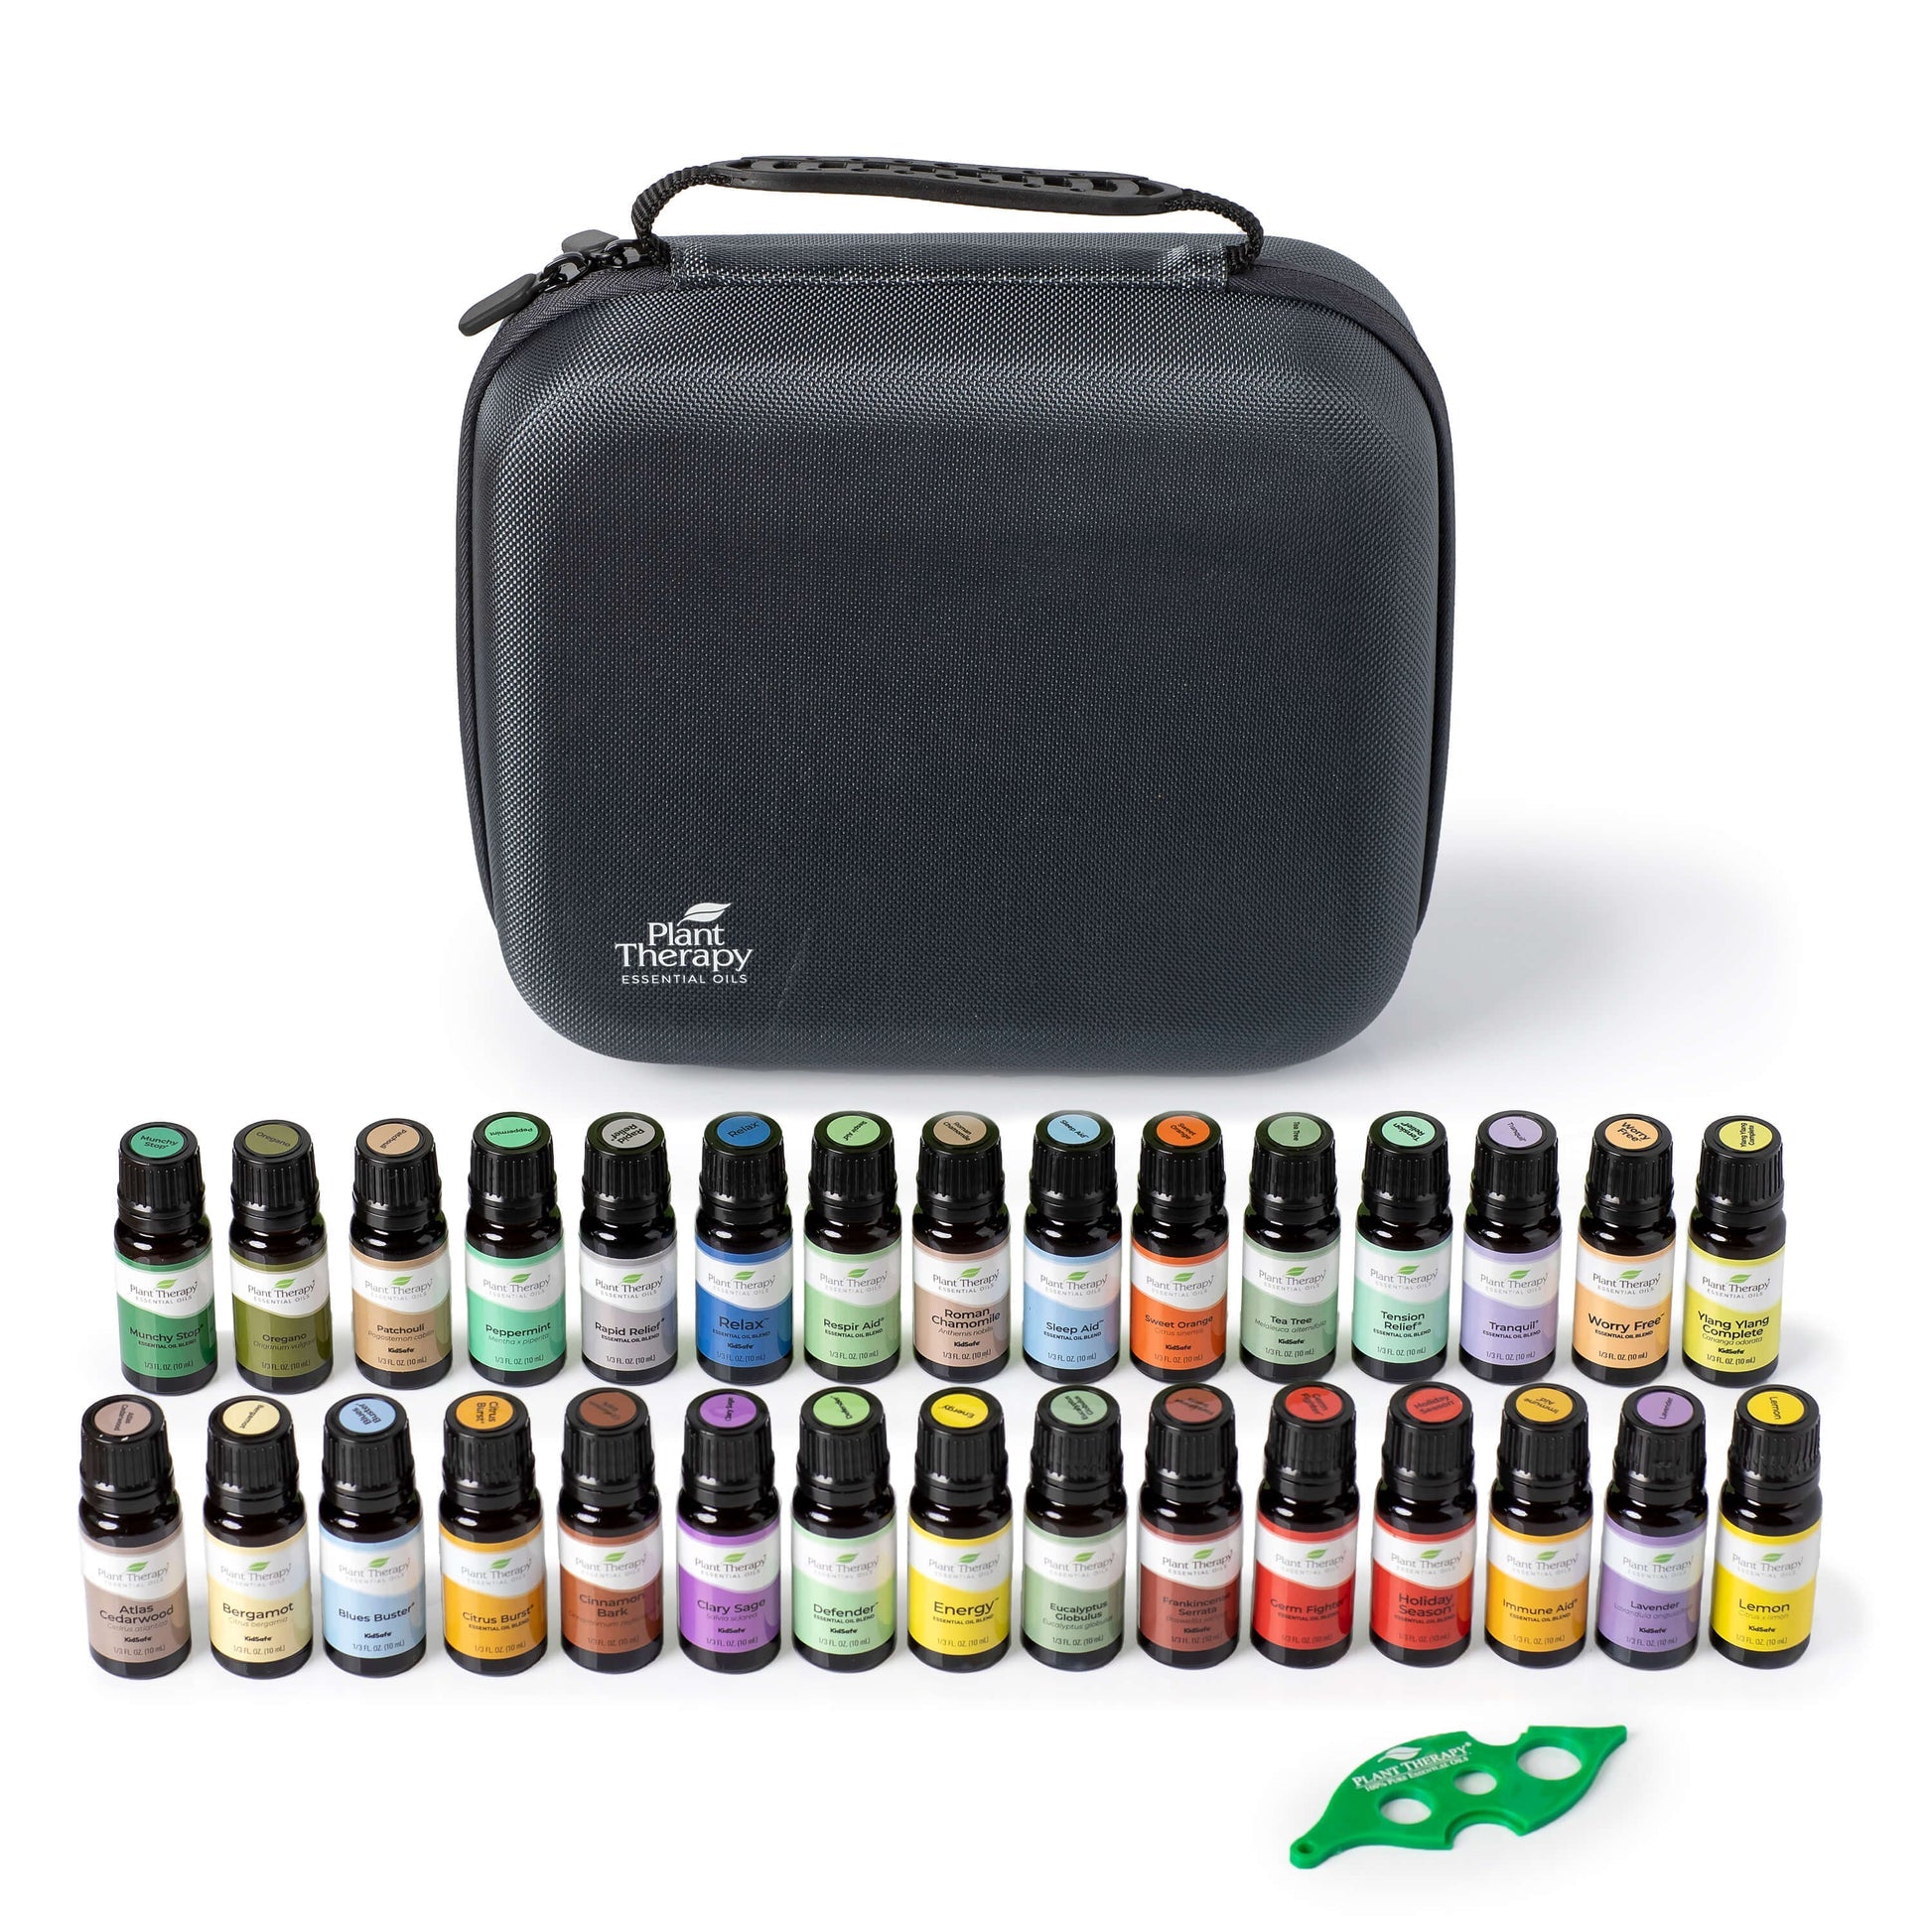  15 & 15 Essential Oil Set with Carrying Case Plant Therapy Perfumarie